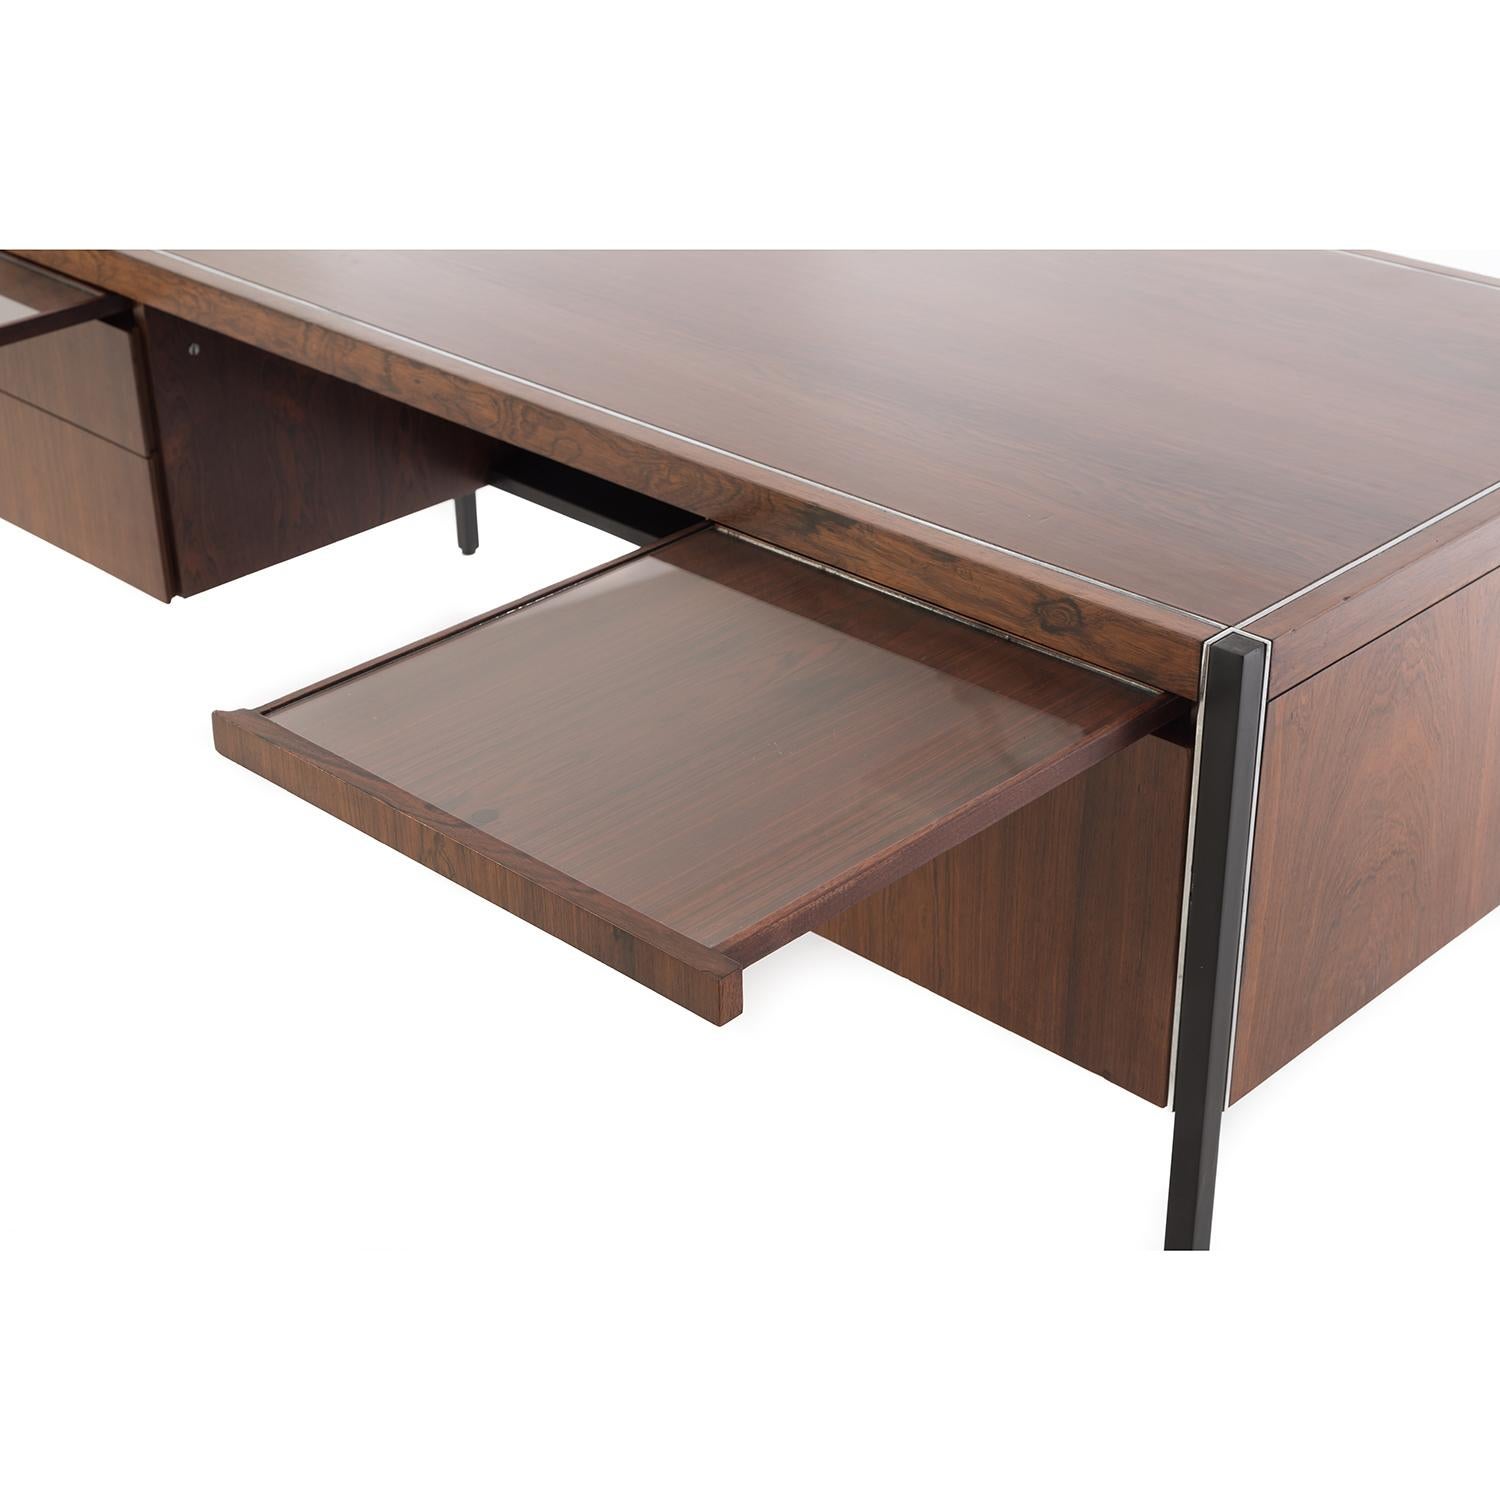 Mid-Century Modern Midcentury Executive Desk in Rosewood by Richard Schultz for Knoll